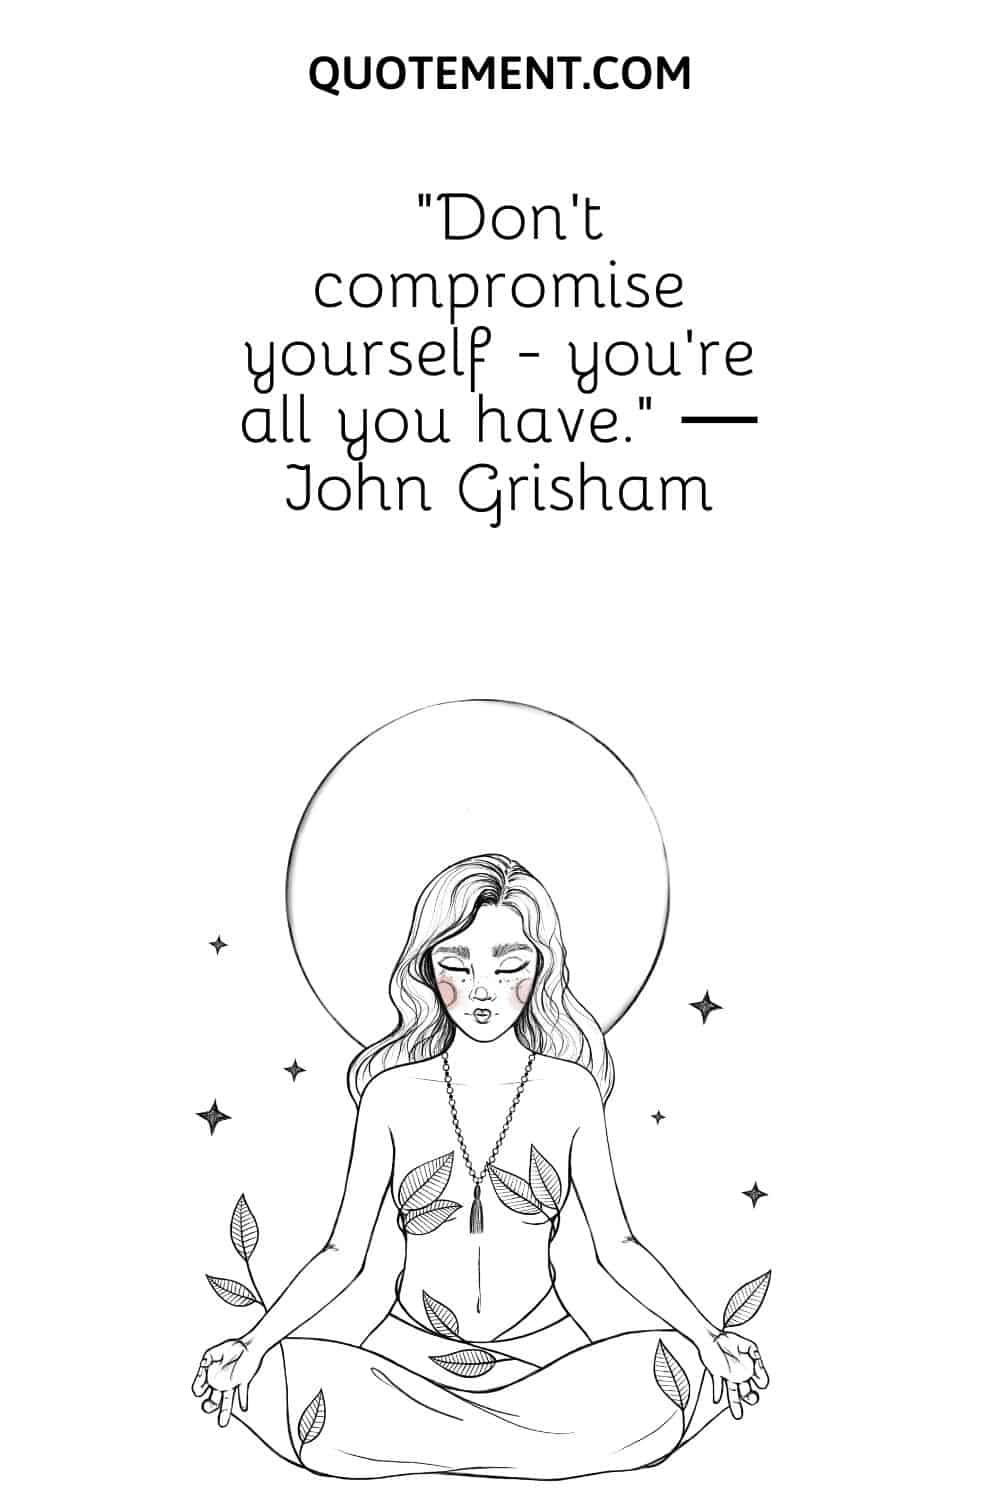 Don't compromise yourself - you're all you have